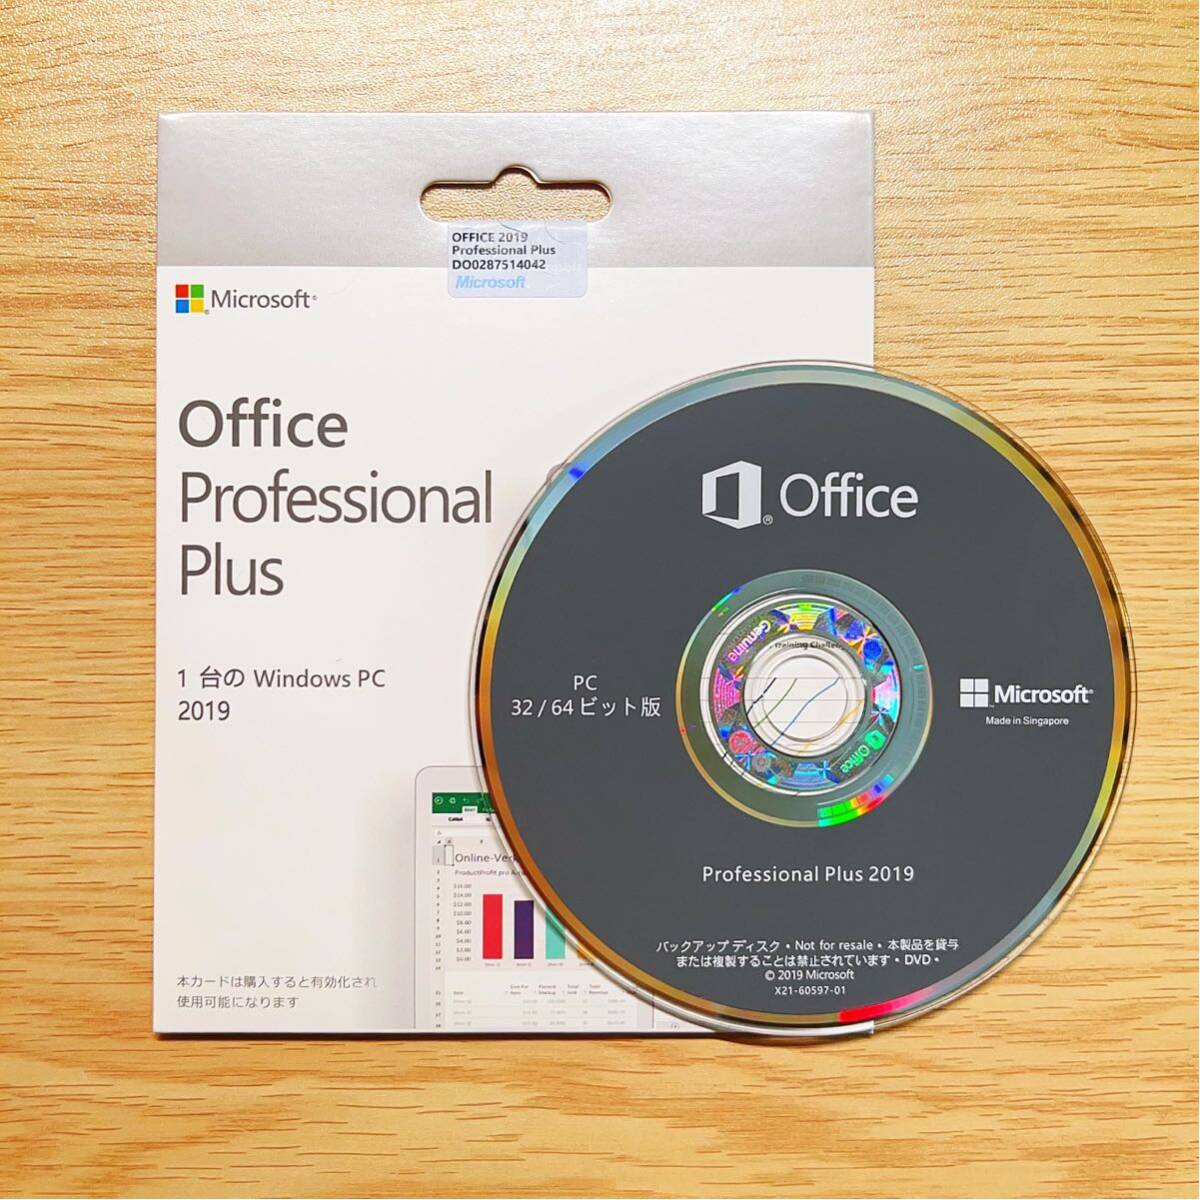 Microsoft Office 2019 Professional plus DVD.. package version 2 set new goods unopened certification guarantee 